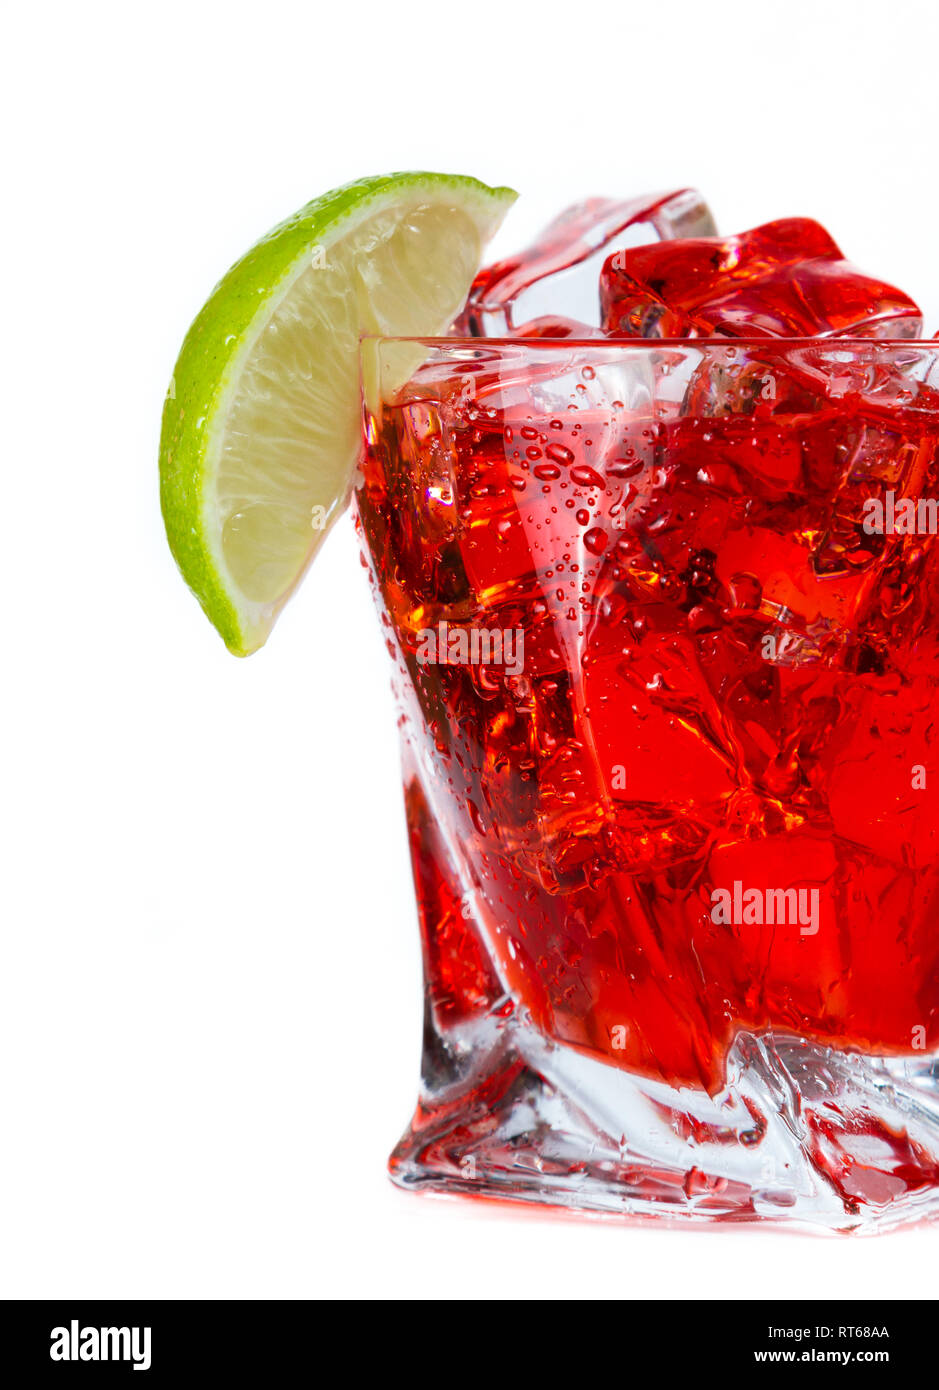 close up of a refreshing classic cocktail with vodka and cranberry juice served on the rocks with a lime wedge garnish isolated on a white background Stock Photo